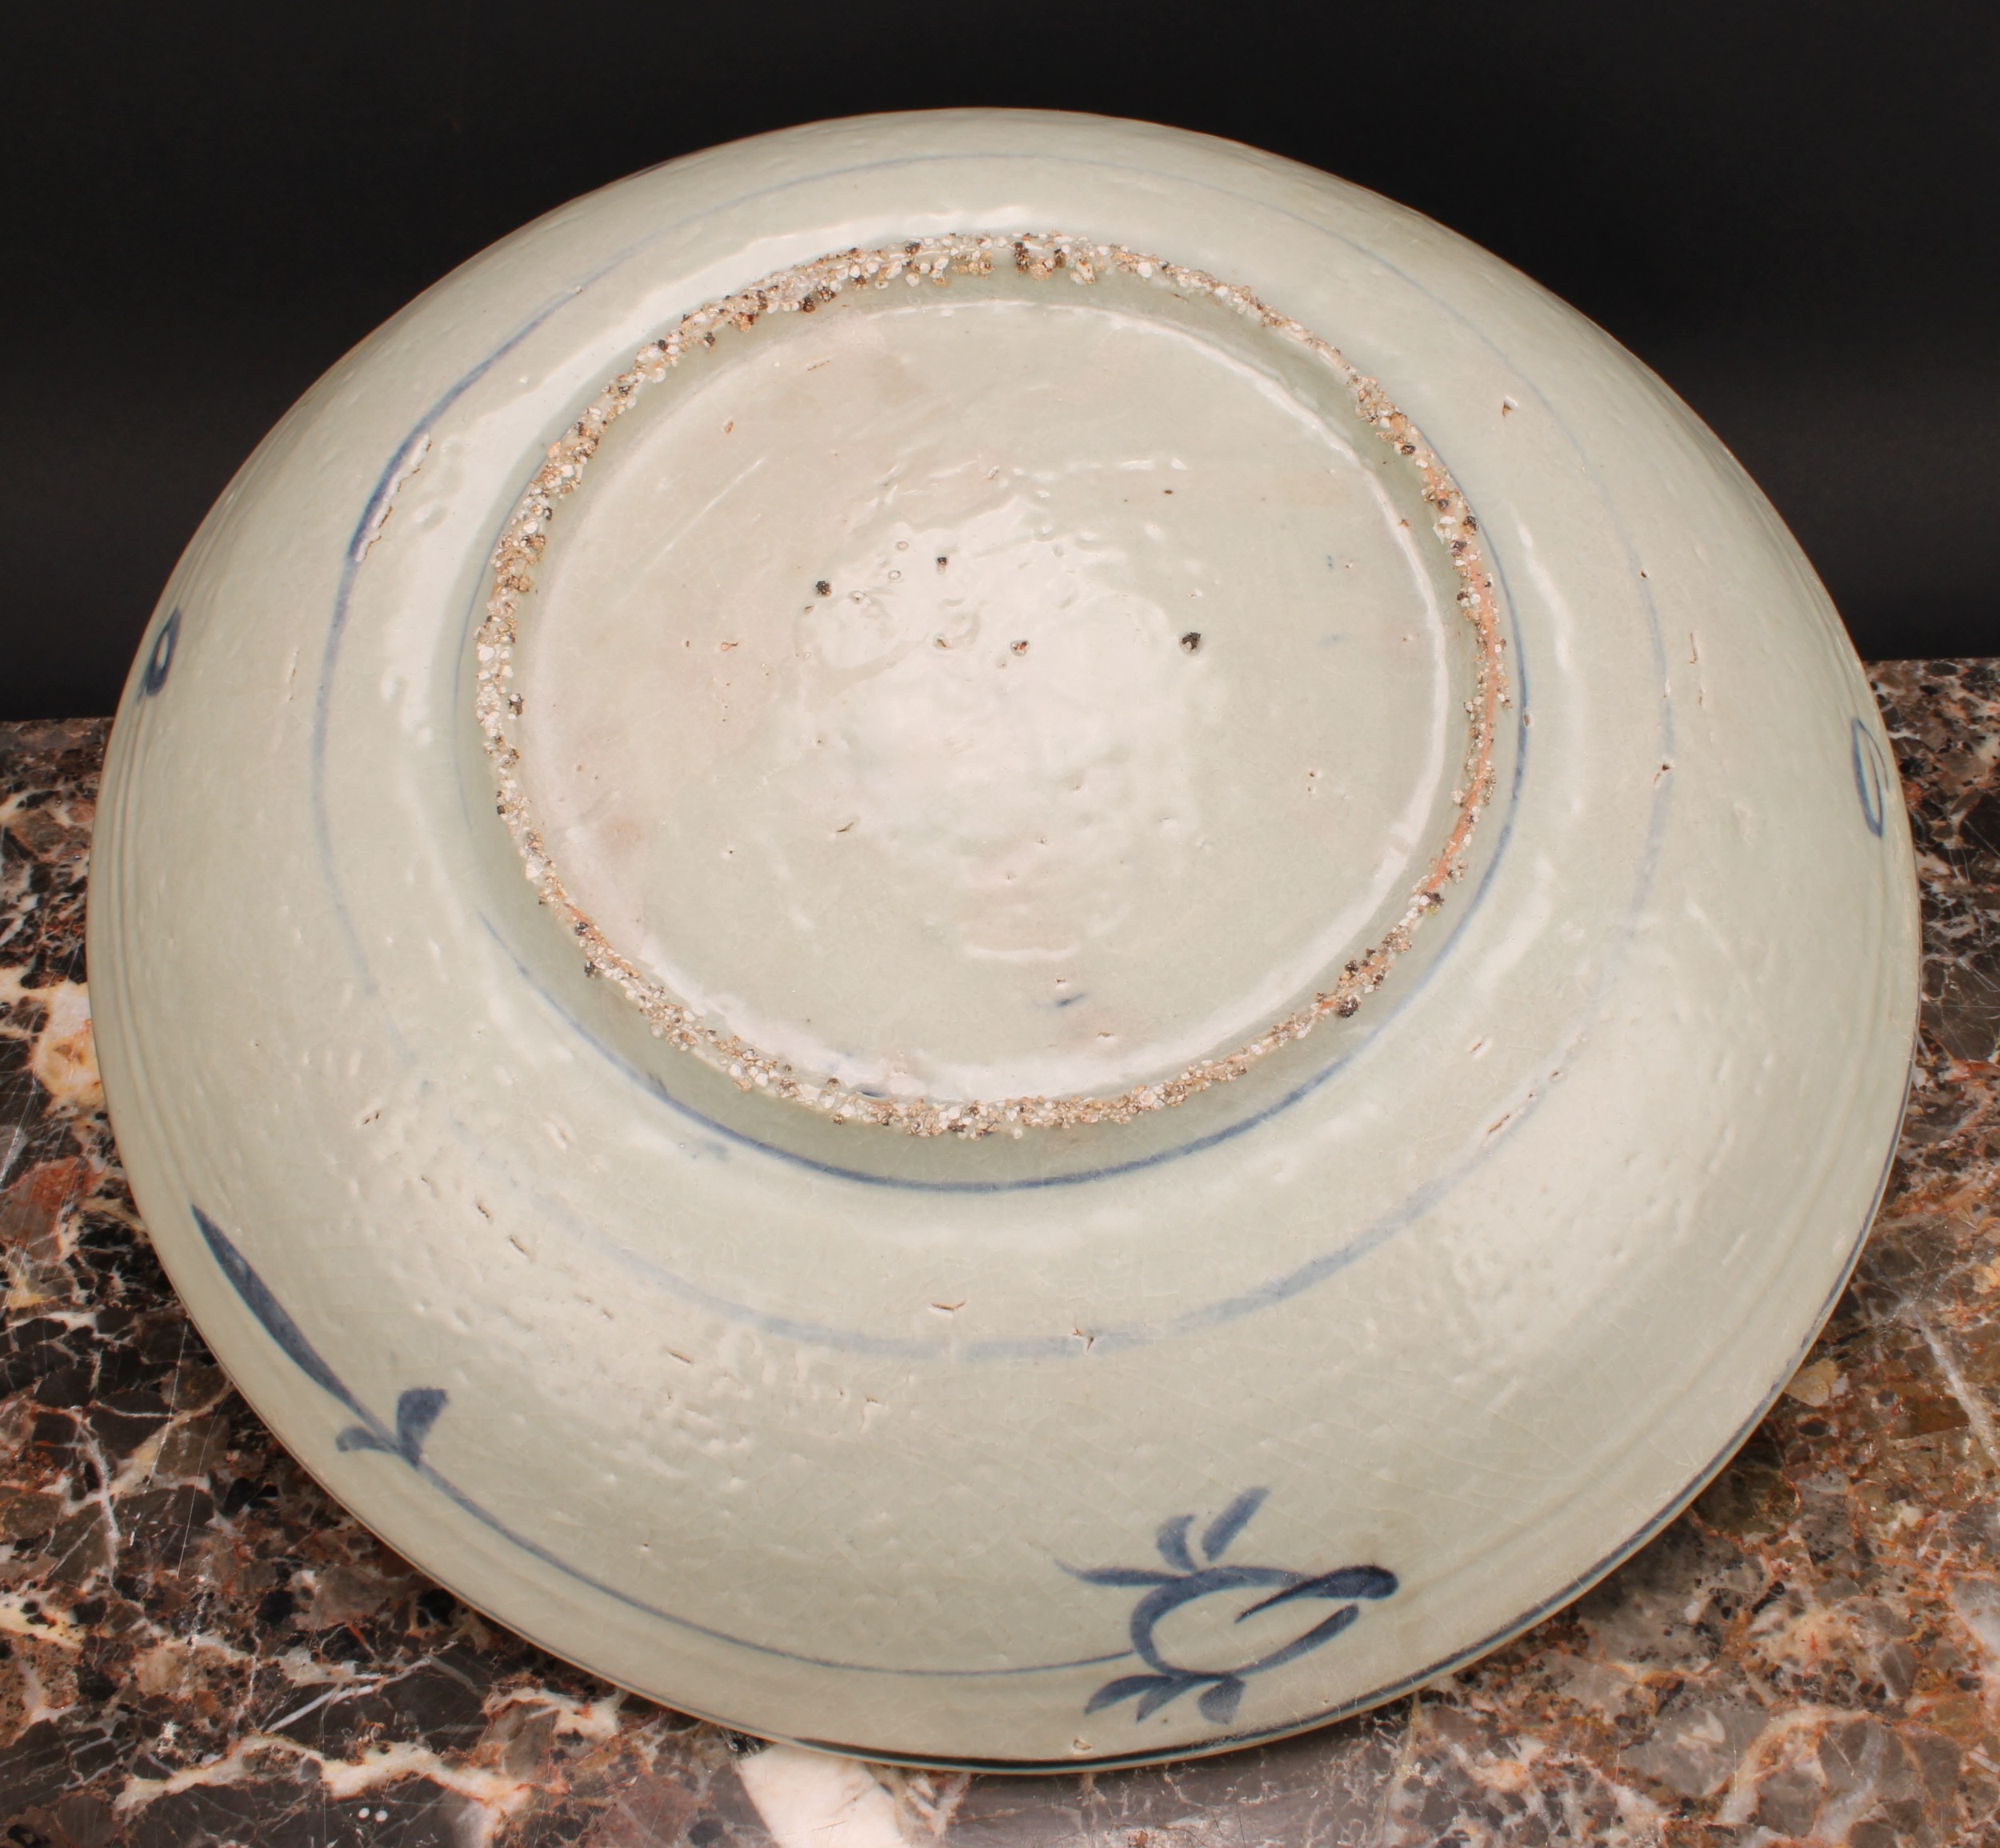 A pair of 17th century Chinese shipwreck porcelain dishes, painted in tones of underglaze blue - Image 5 of 5